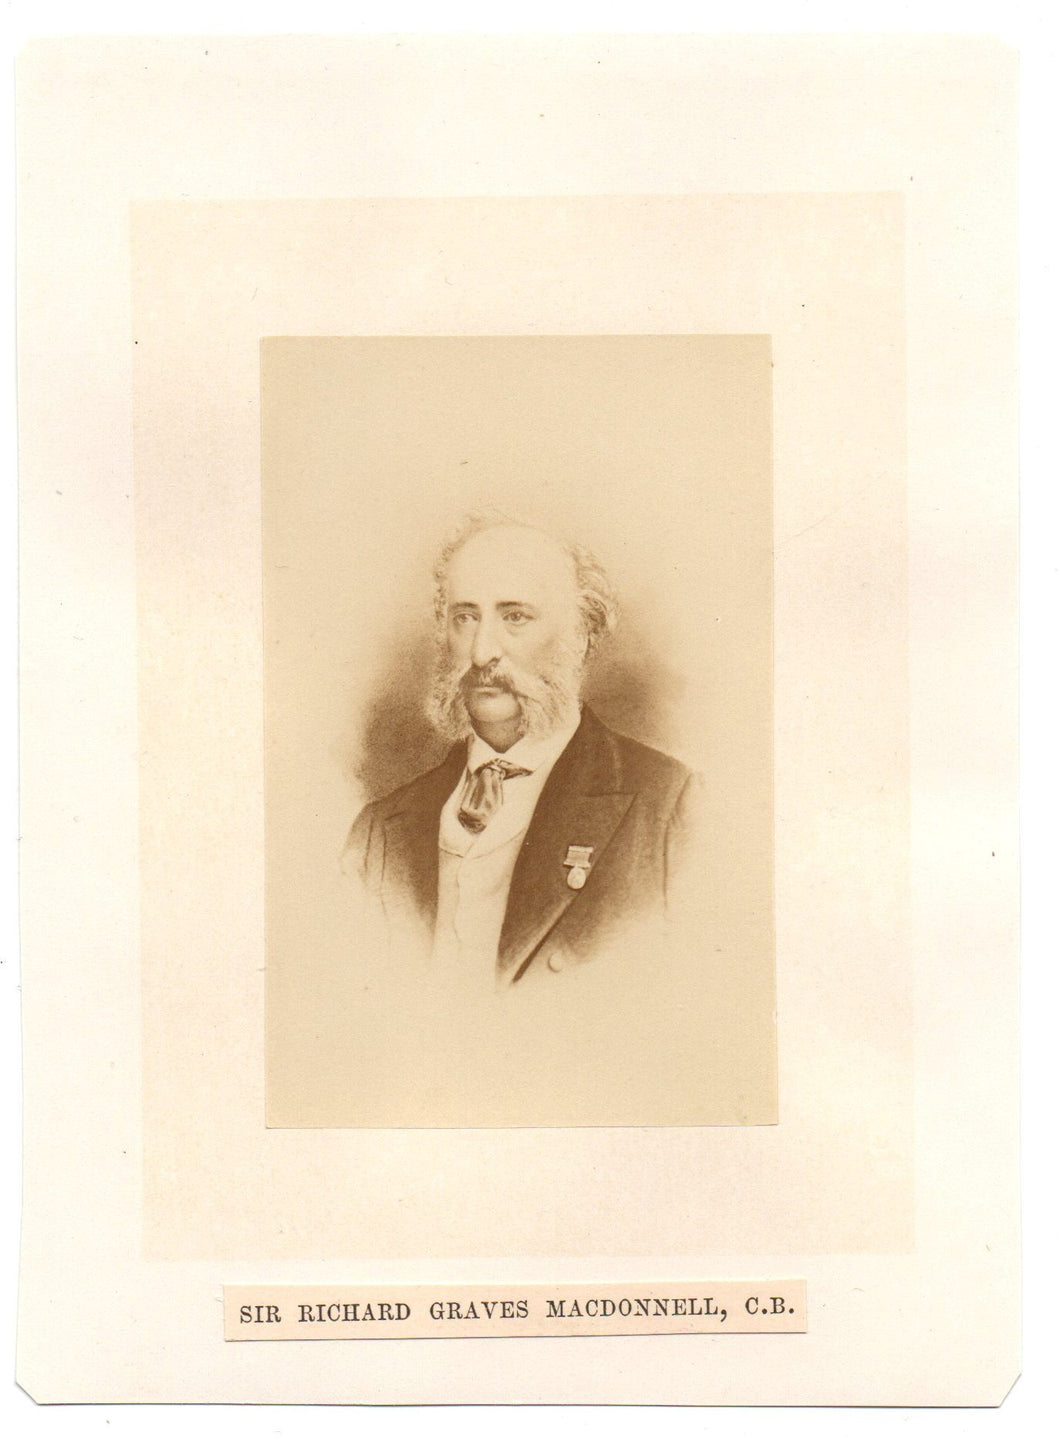 Photo of a portrait of Sir Richard Graves Macdonnell, C.B.